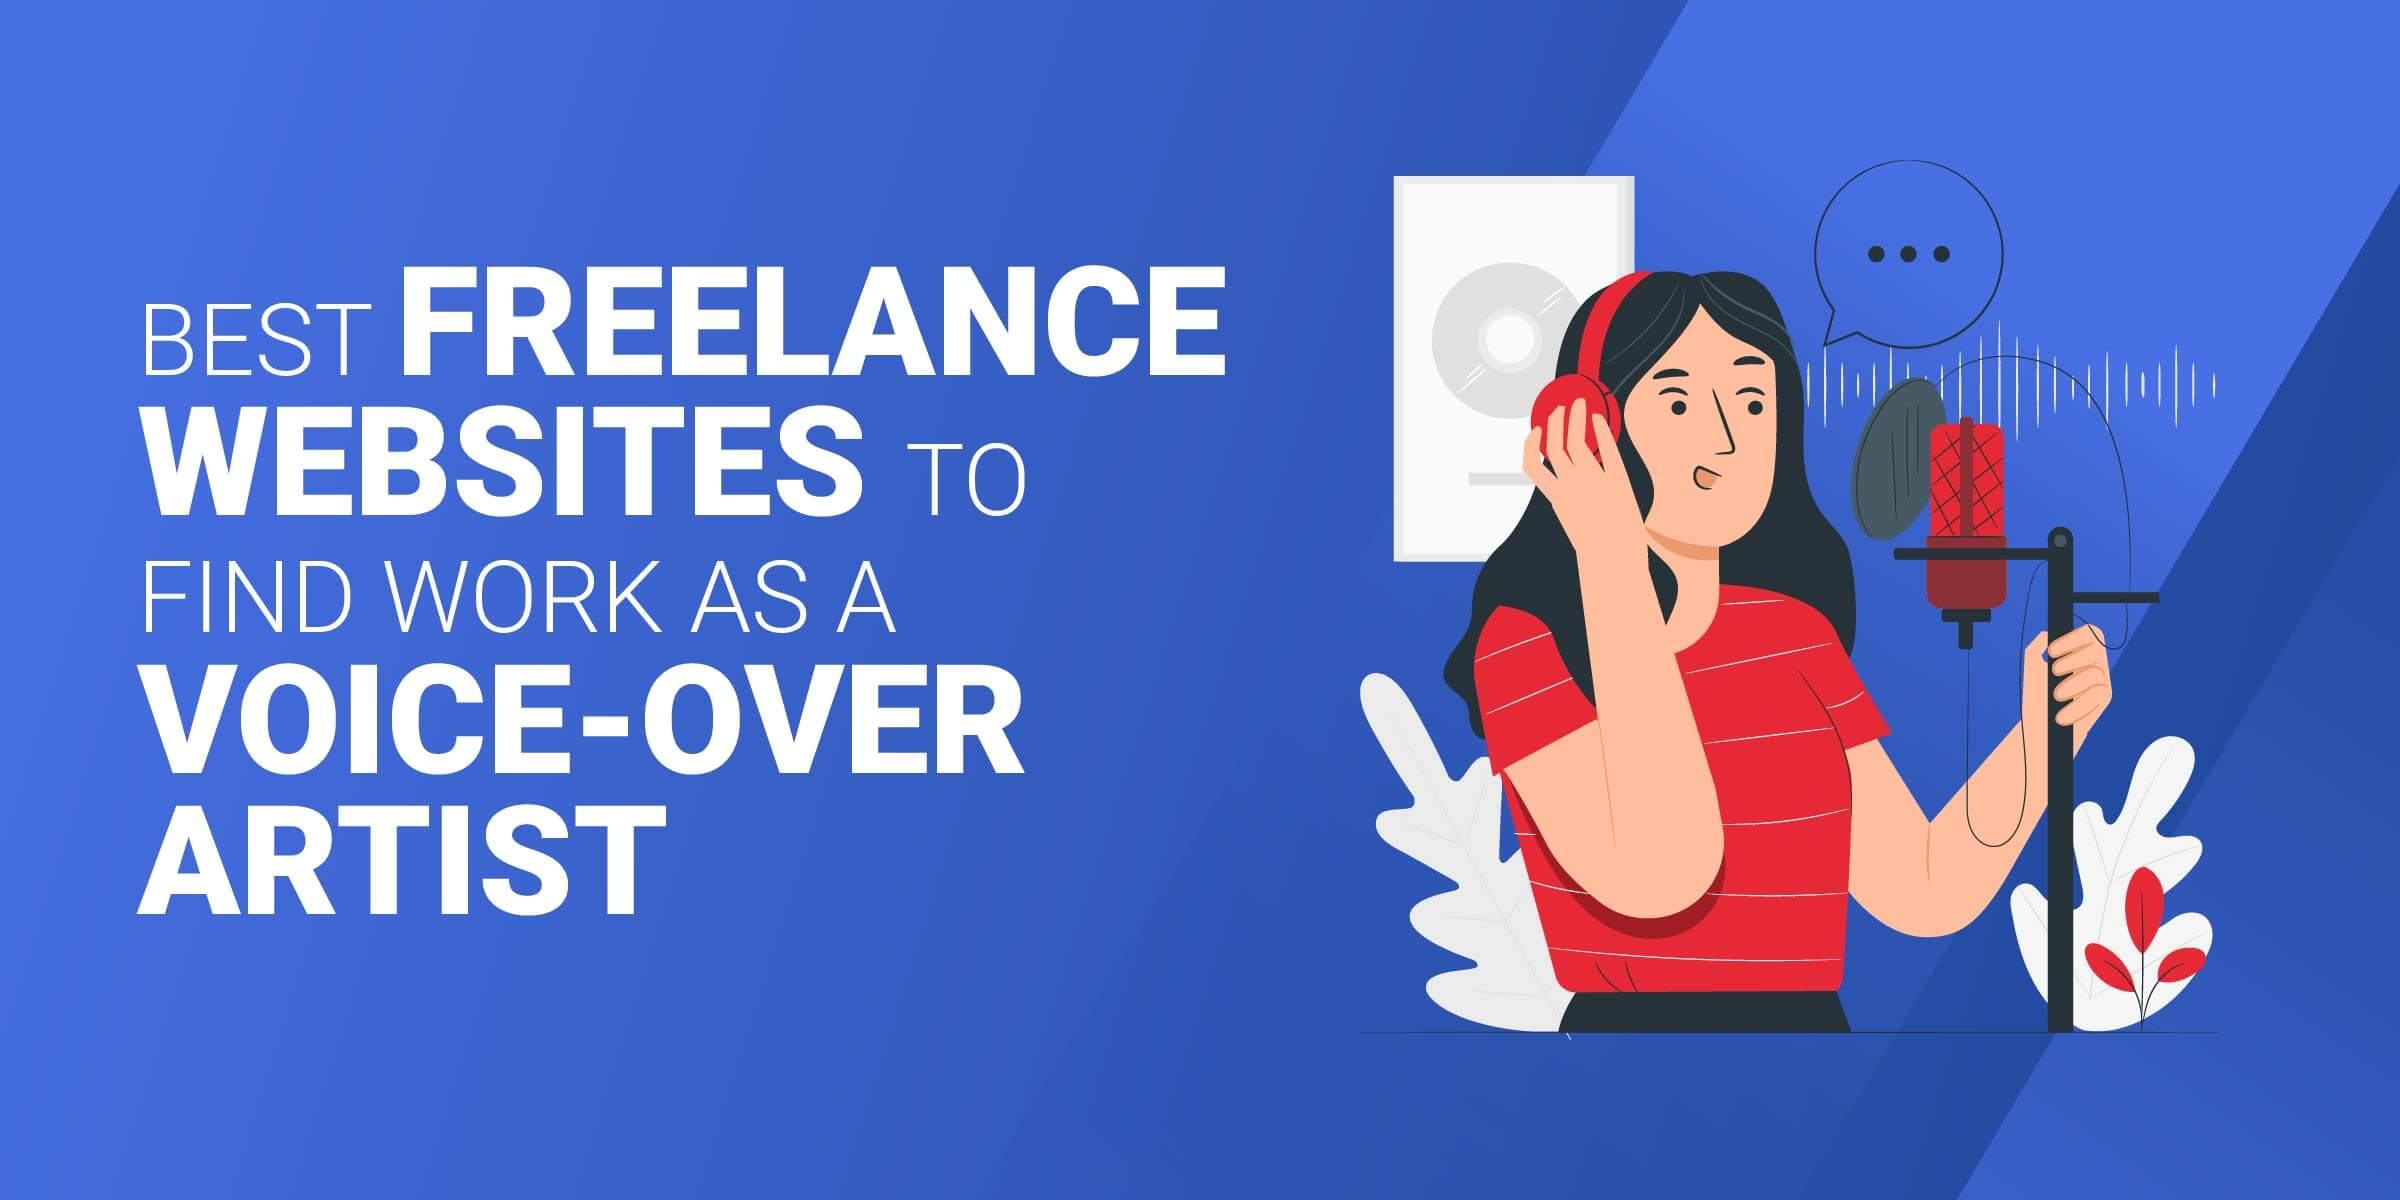 Fear? Not If You Use freelancing The Right Way!